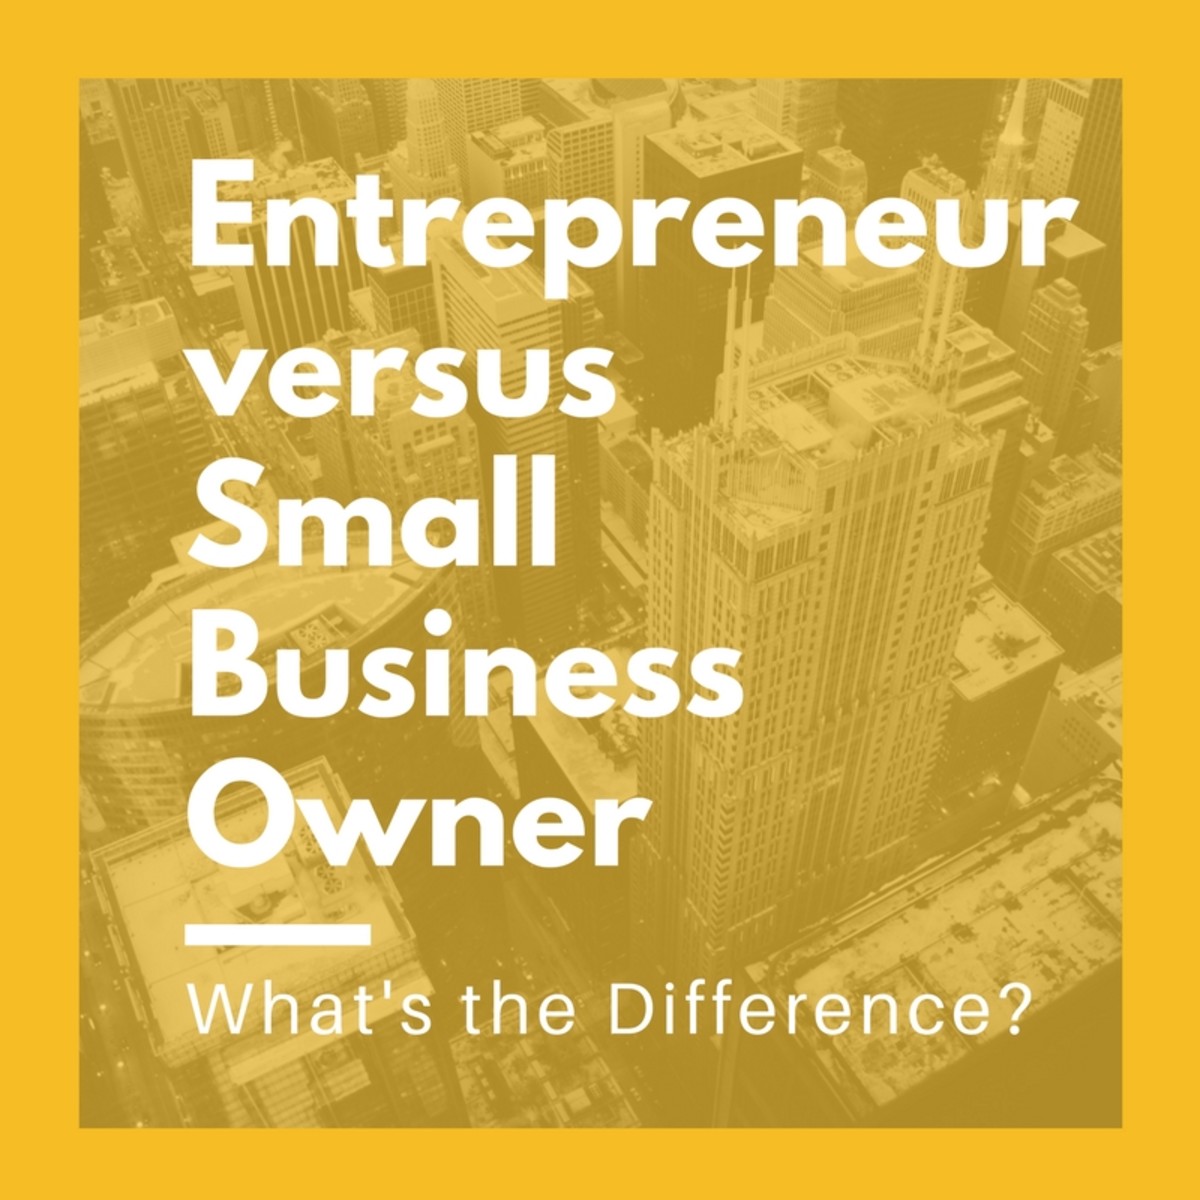 Are there any differences between an owner of a small business and an entrepreneur?